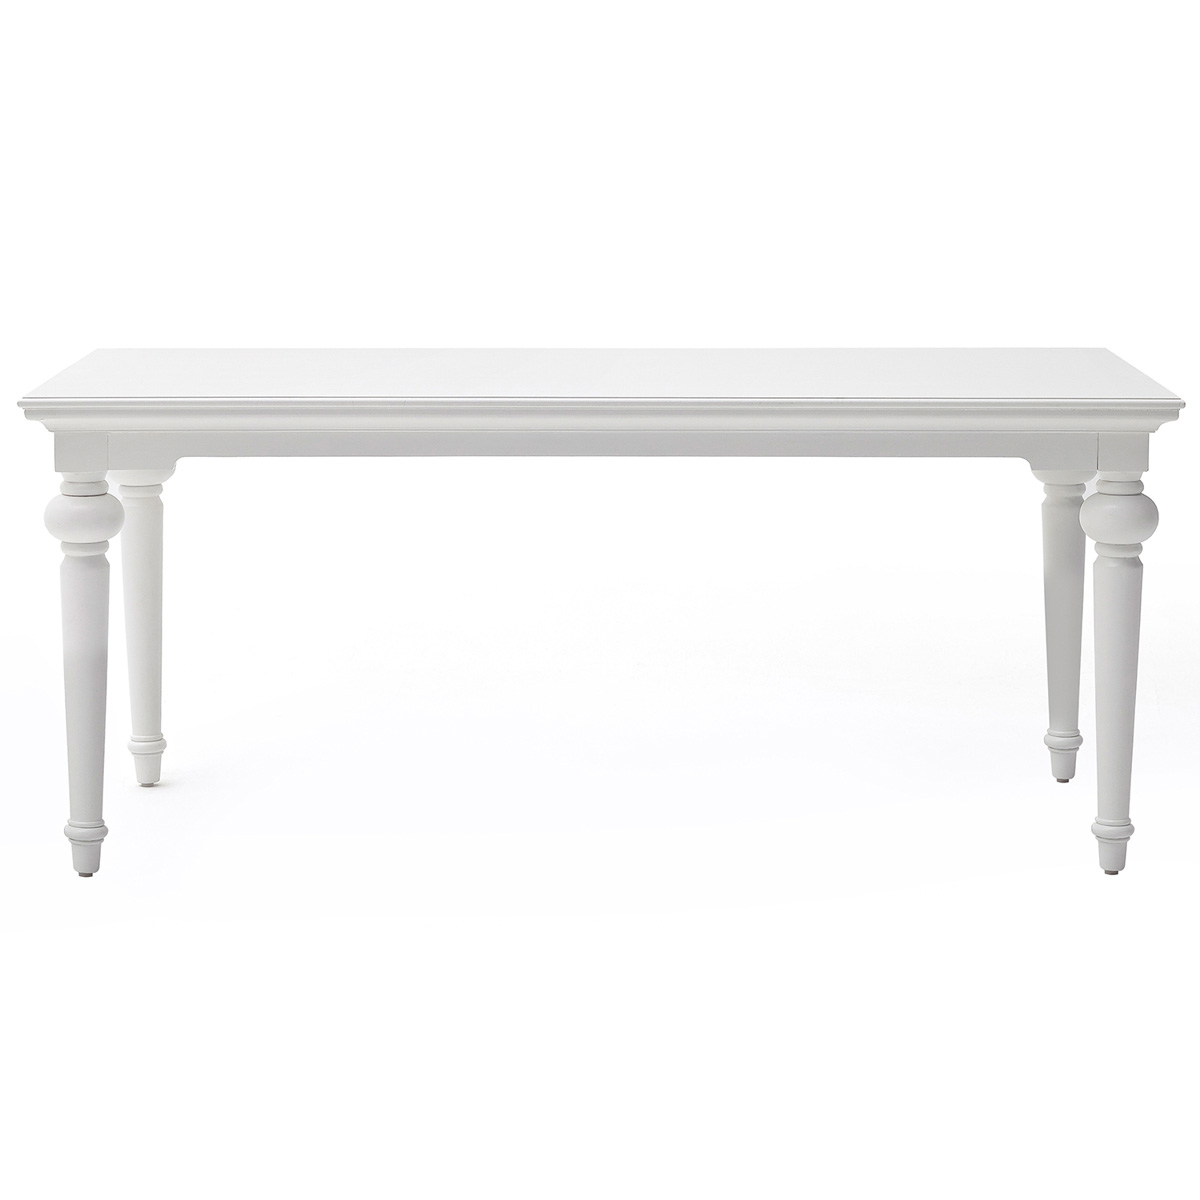 NovaSolo Provence 79 inch Dining Table